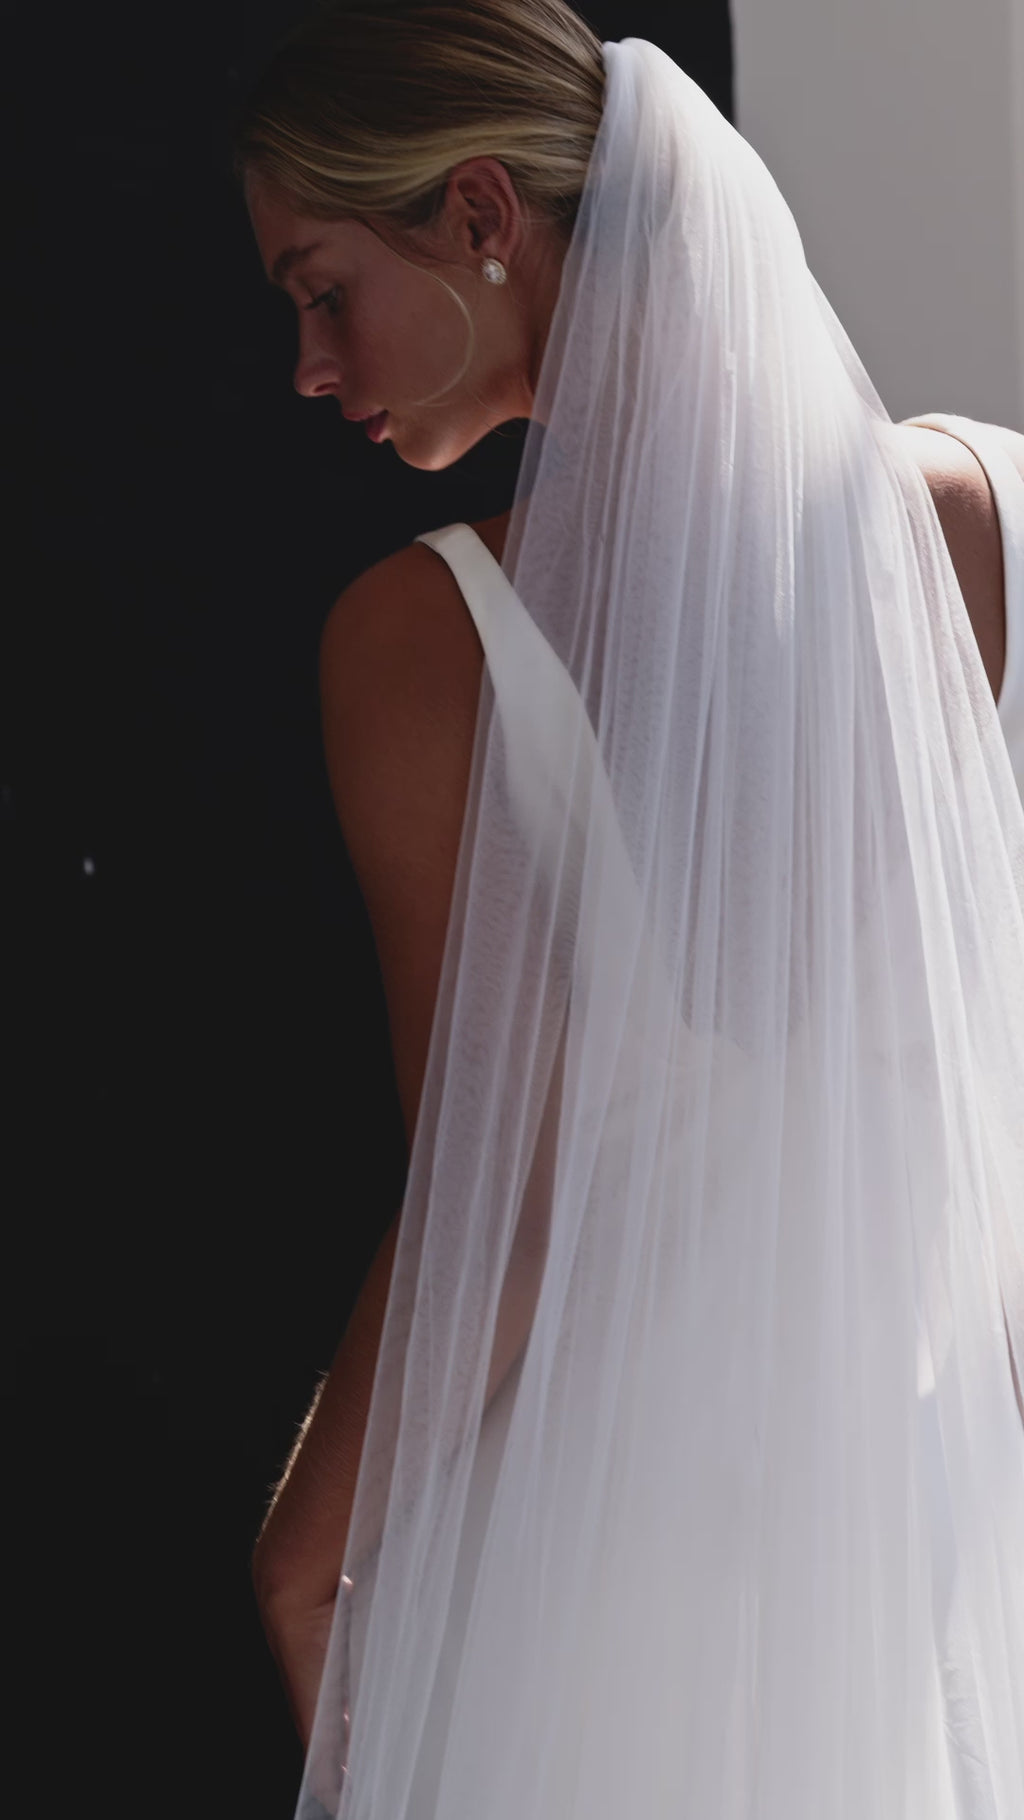 Wedding veil worn by bride to show its light bride simple tulle.